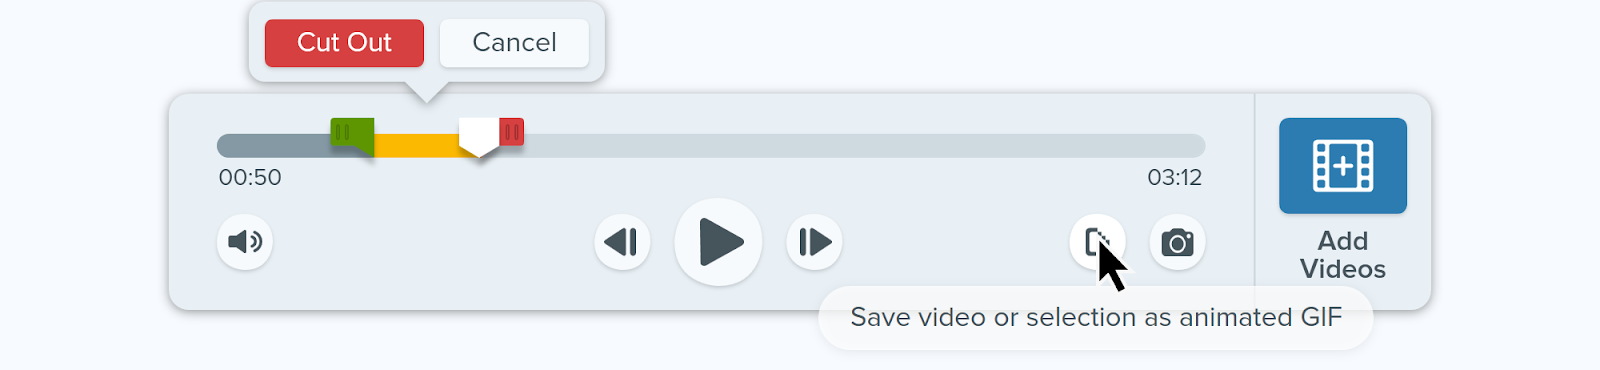 Image of Snagit's easy-to-use UI in which the cursor is hovering over the "Save video or selection as an animated GIF" button.